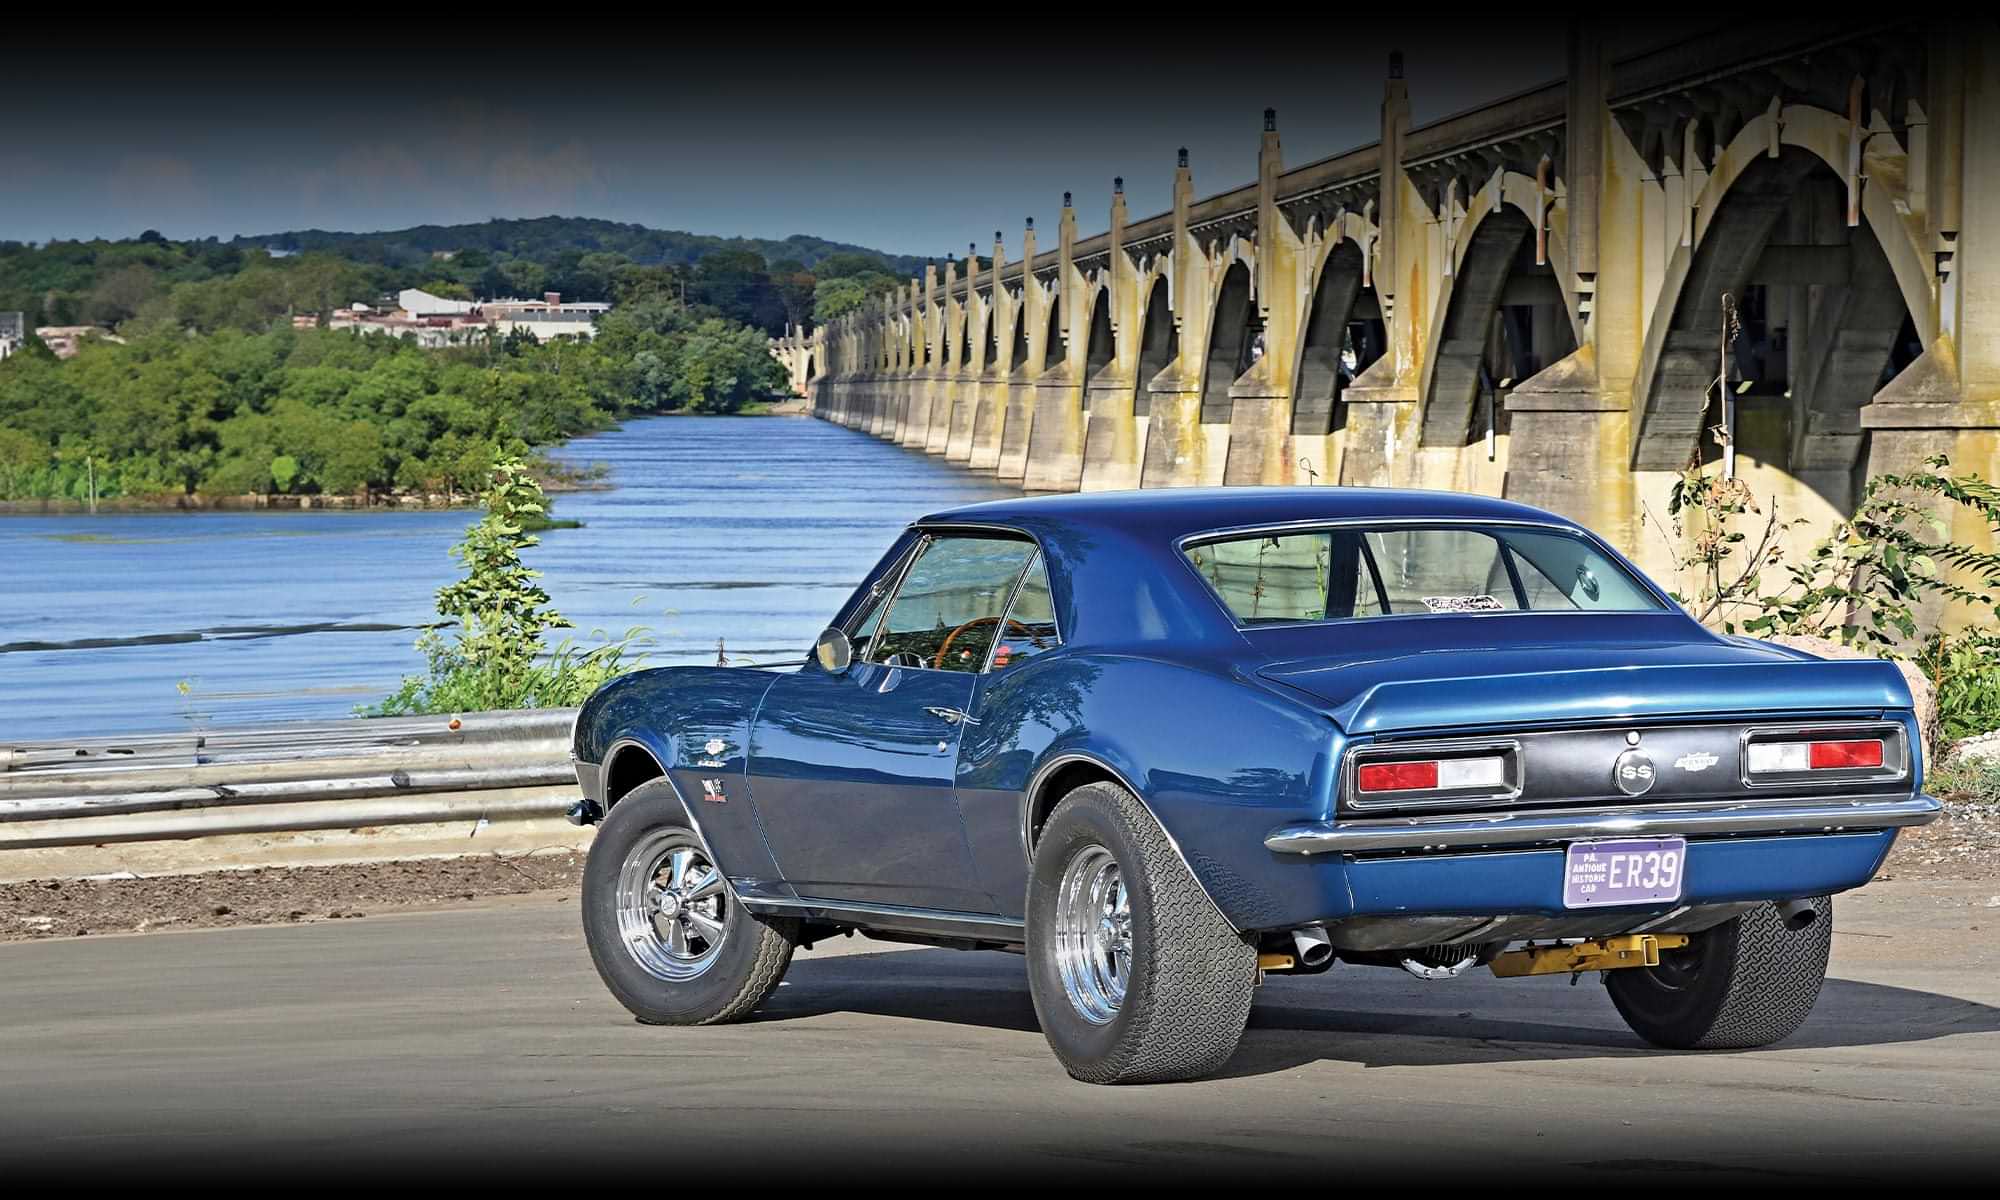 rear quarter view of the '67 Camaro SS parked near a large causeway